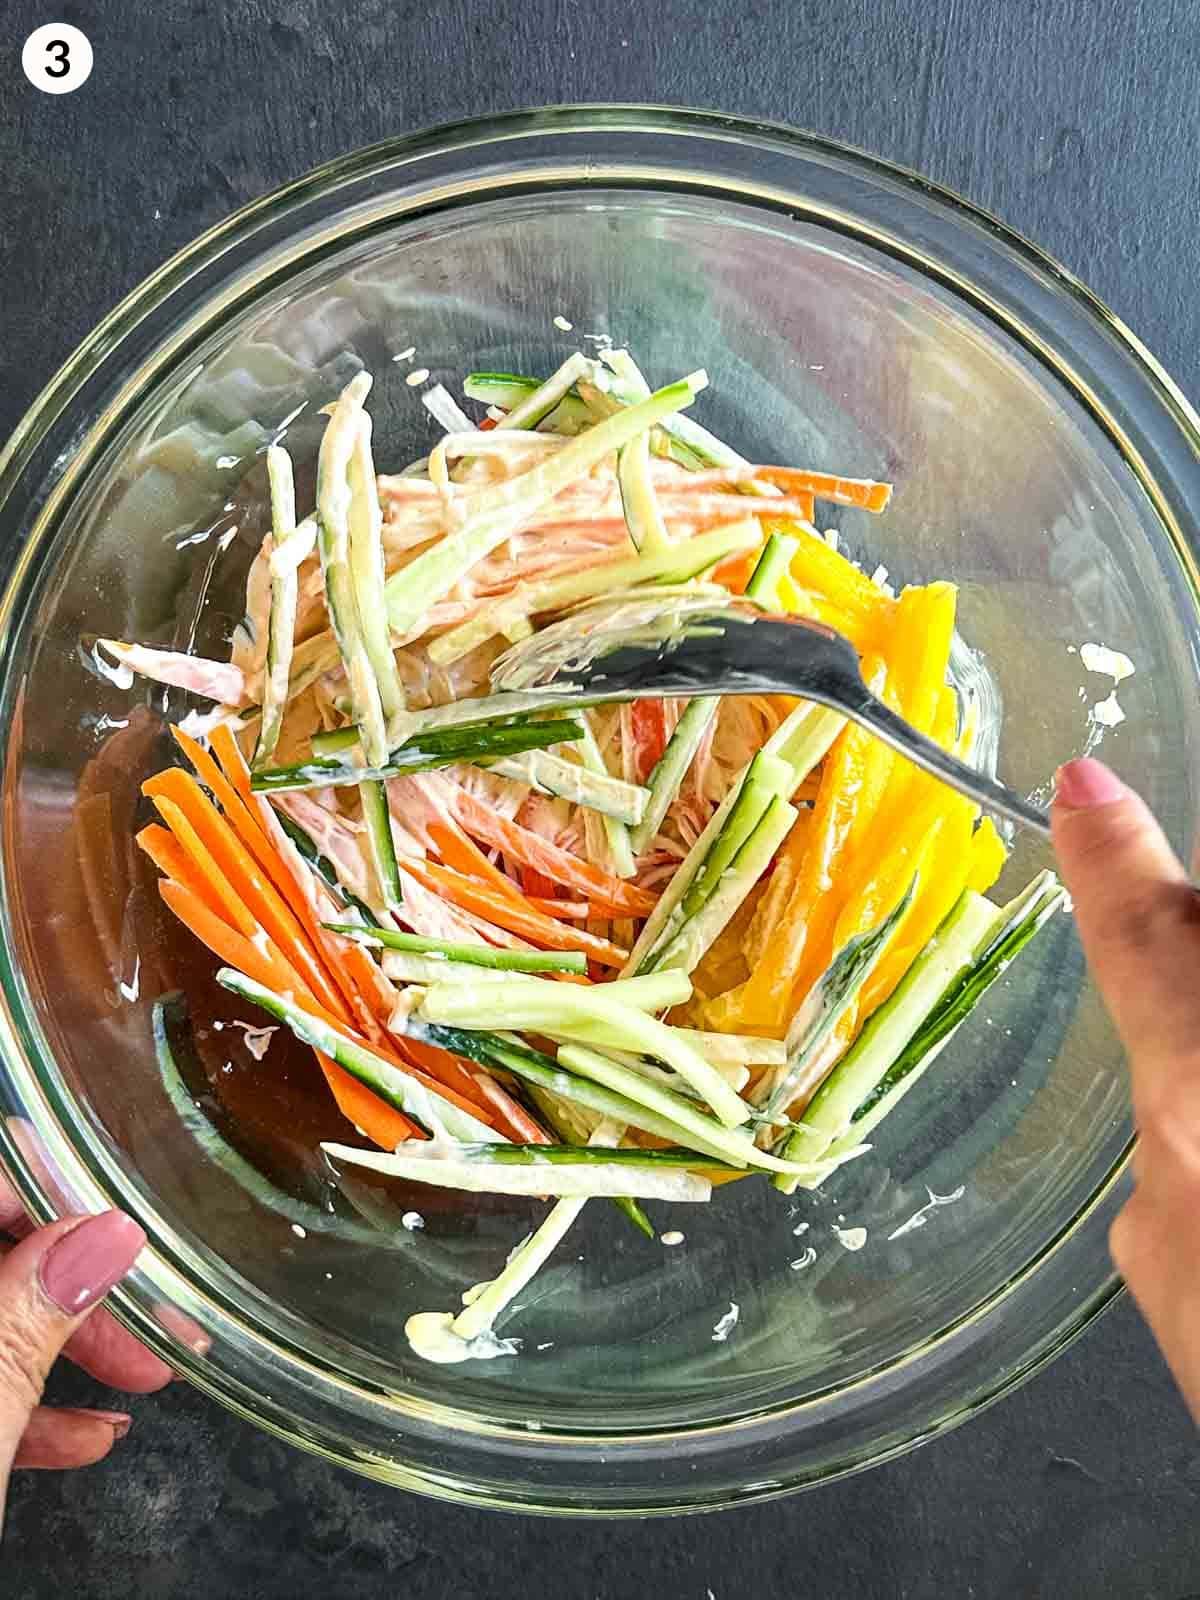 Mixing Kani salad ingredients in a glass mixing bowl with a spoon.